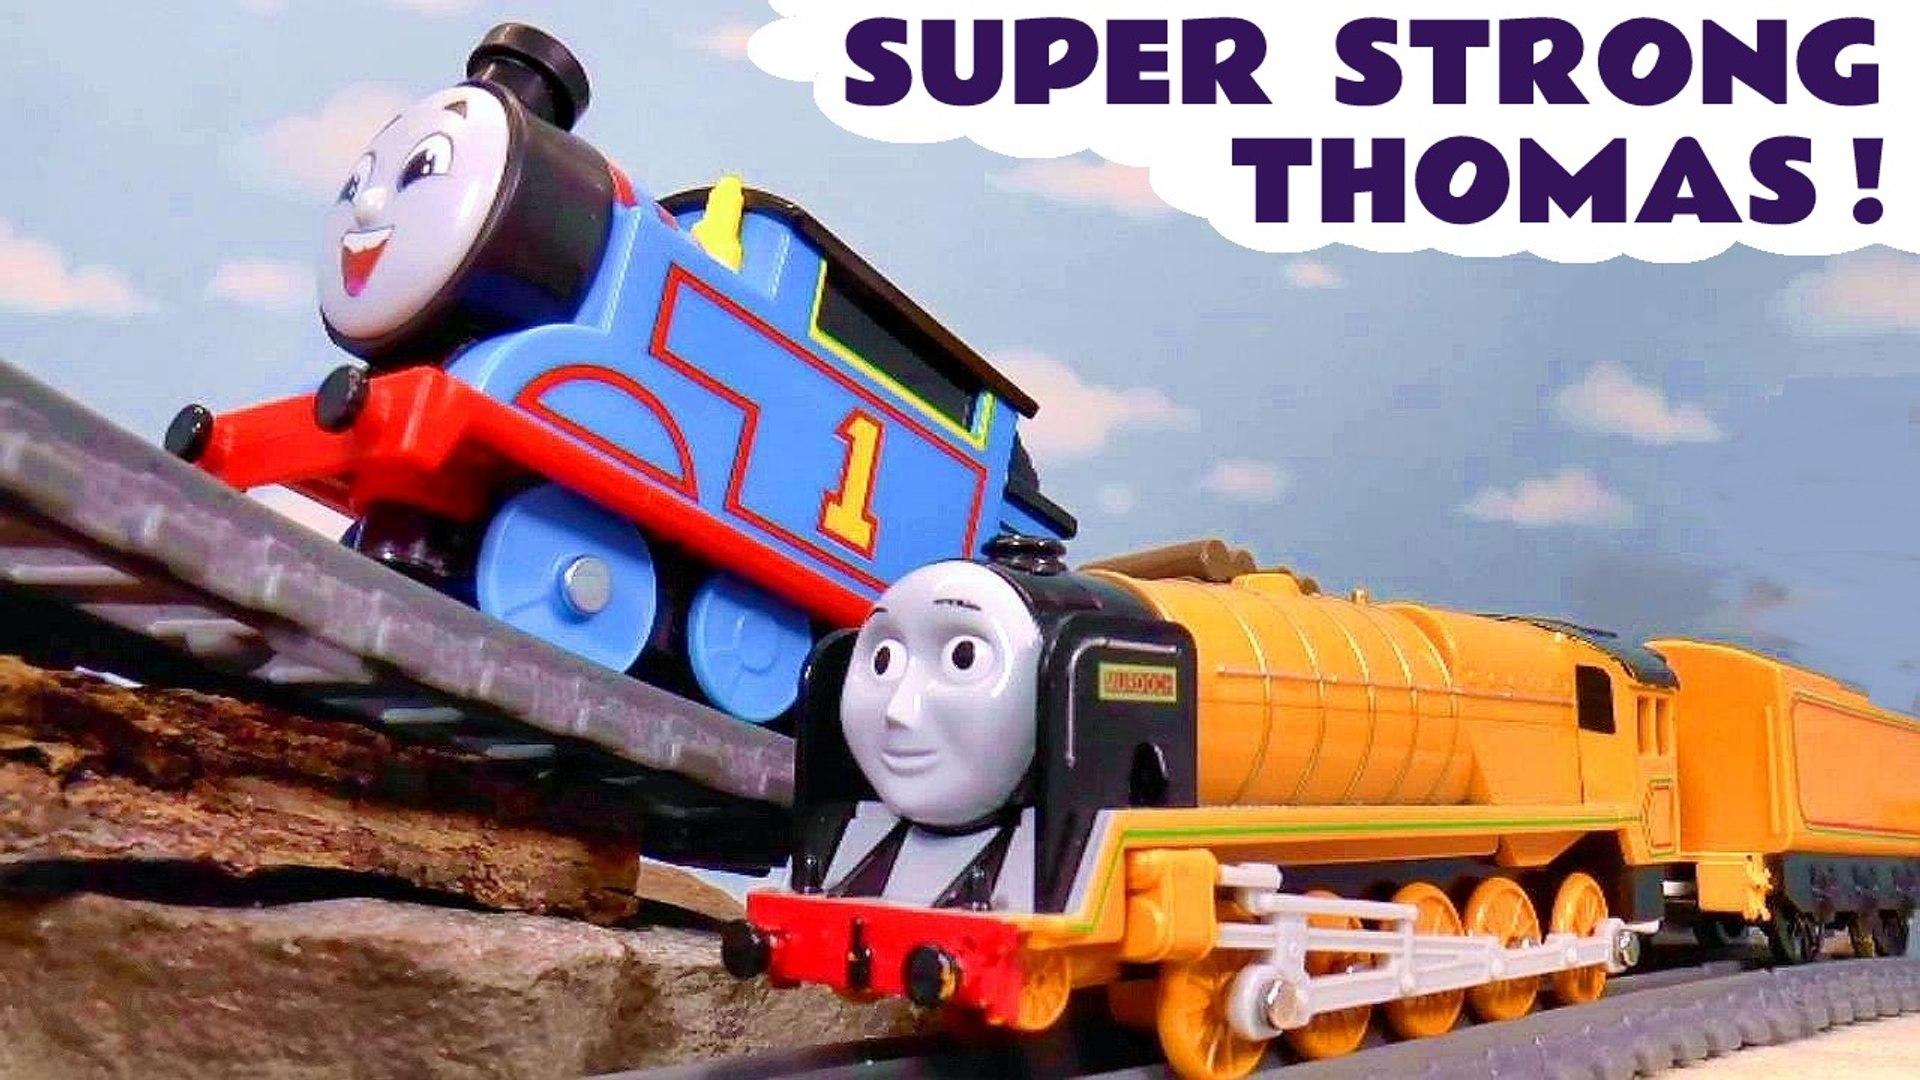 Thomas and Friends Super STRONG Thomas All Engines Go Toy Train Story  Cartoon for Kids - video Dailymotion